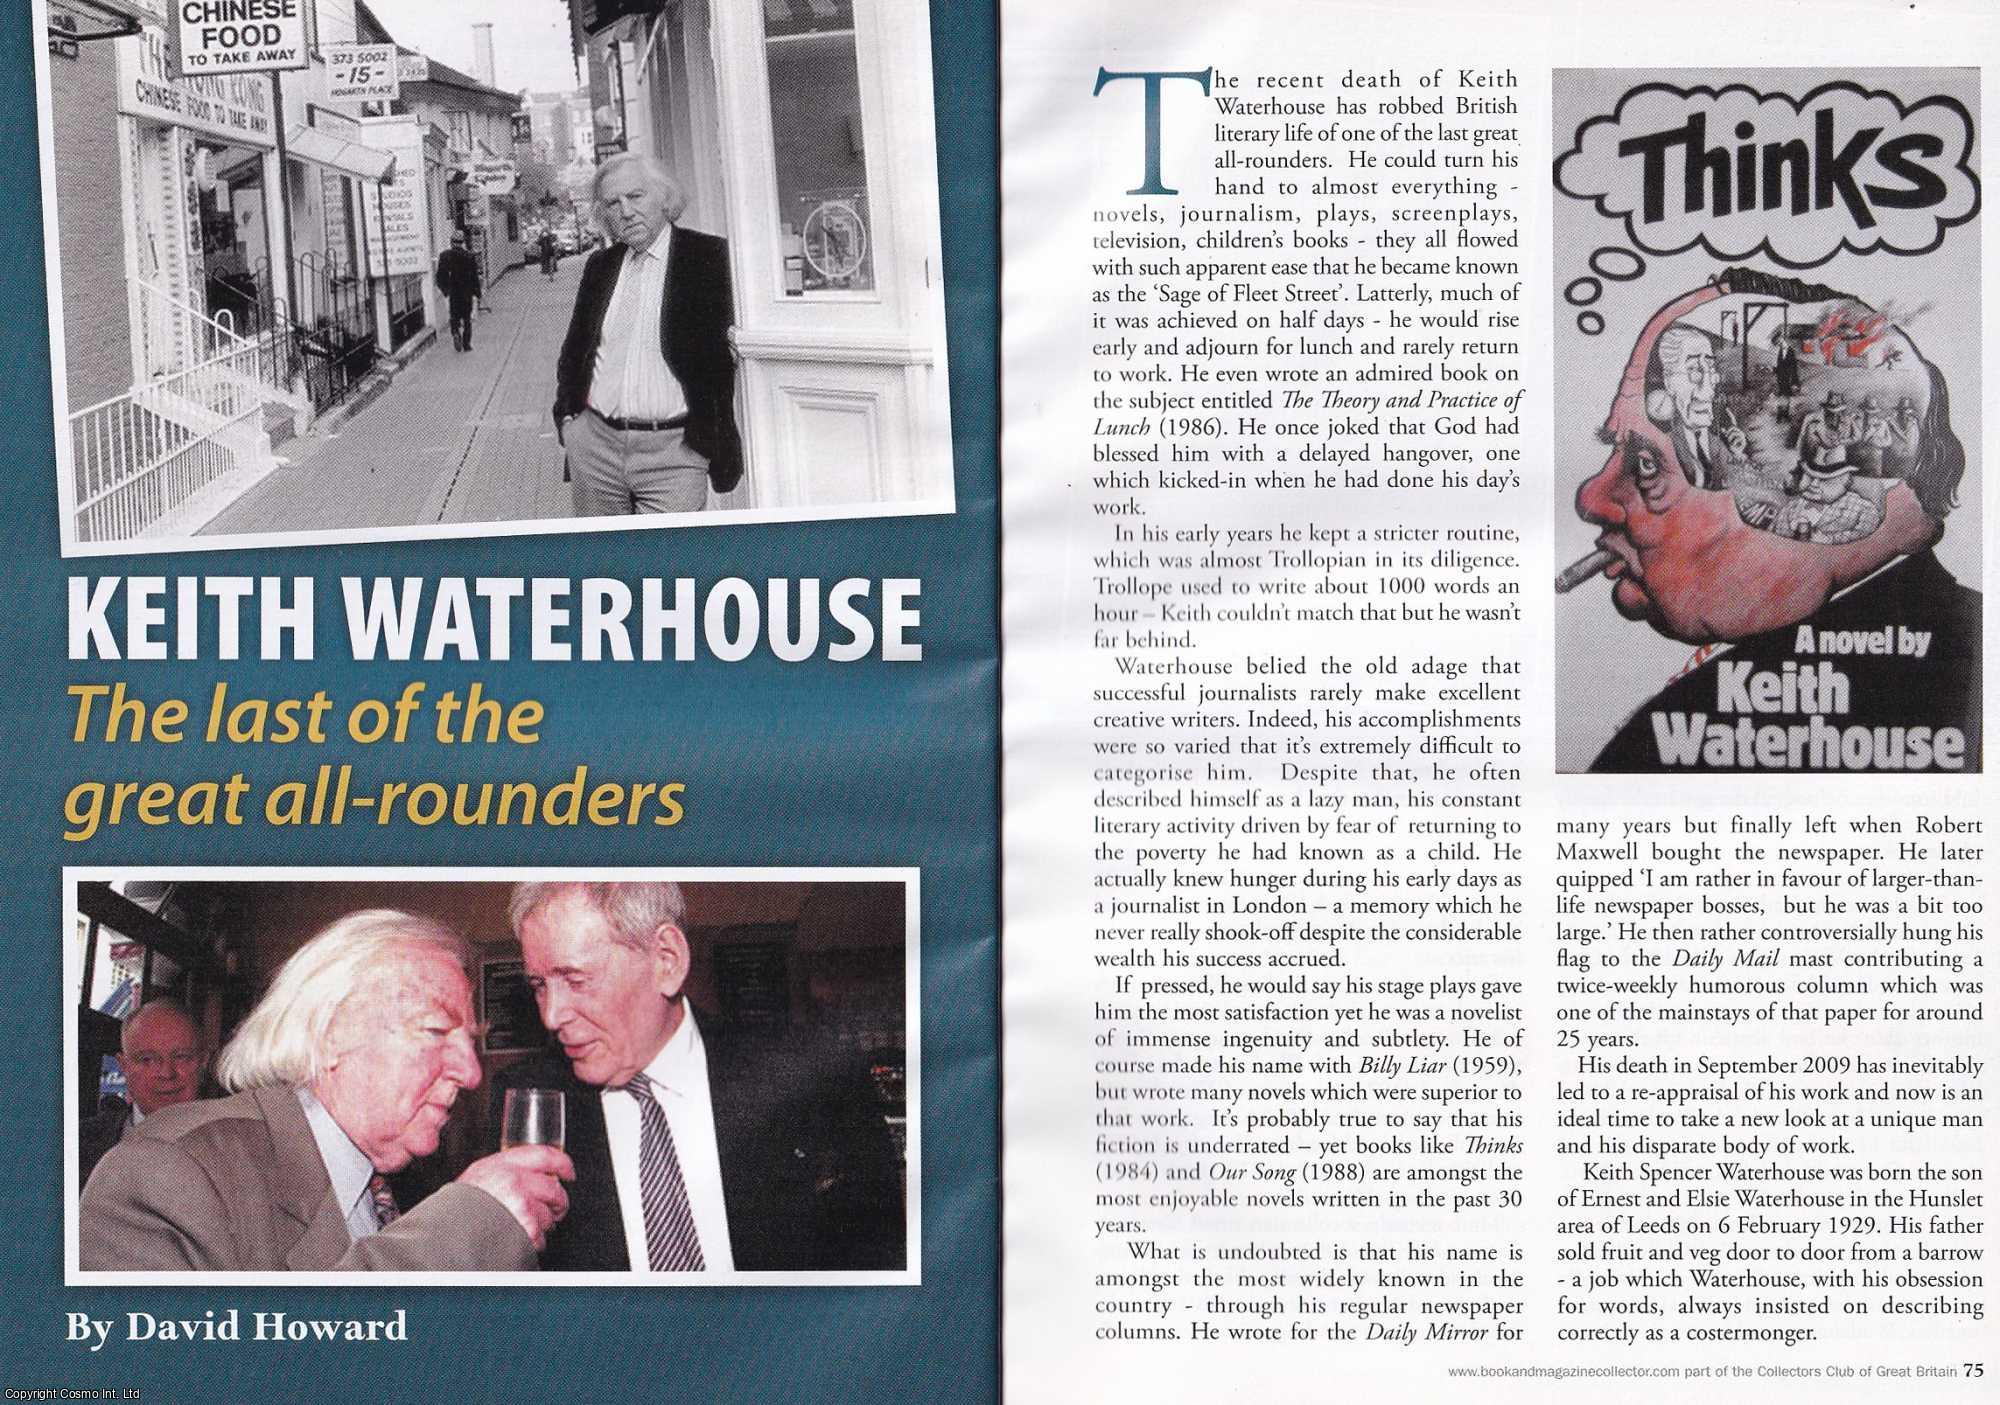 David Howard - Keith Waterhouse. The Last of The Great All-Rounders. This is an original article separated from an issue of The Book & Magazine Collector publication, 2010.